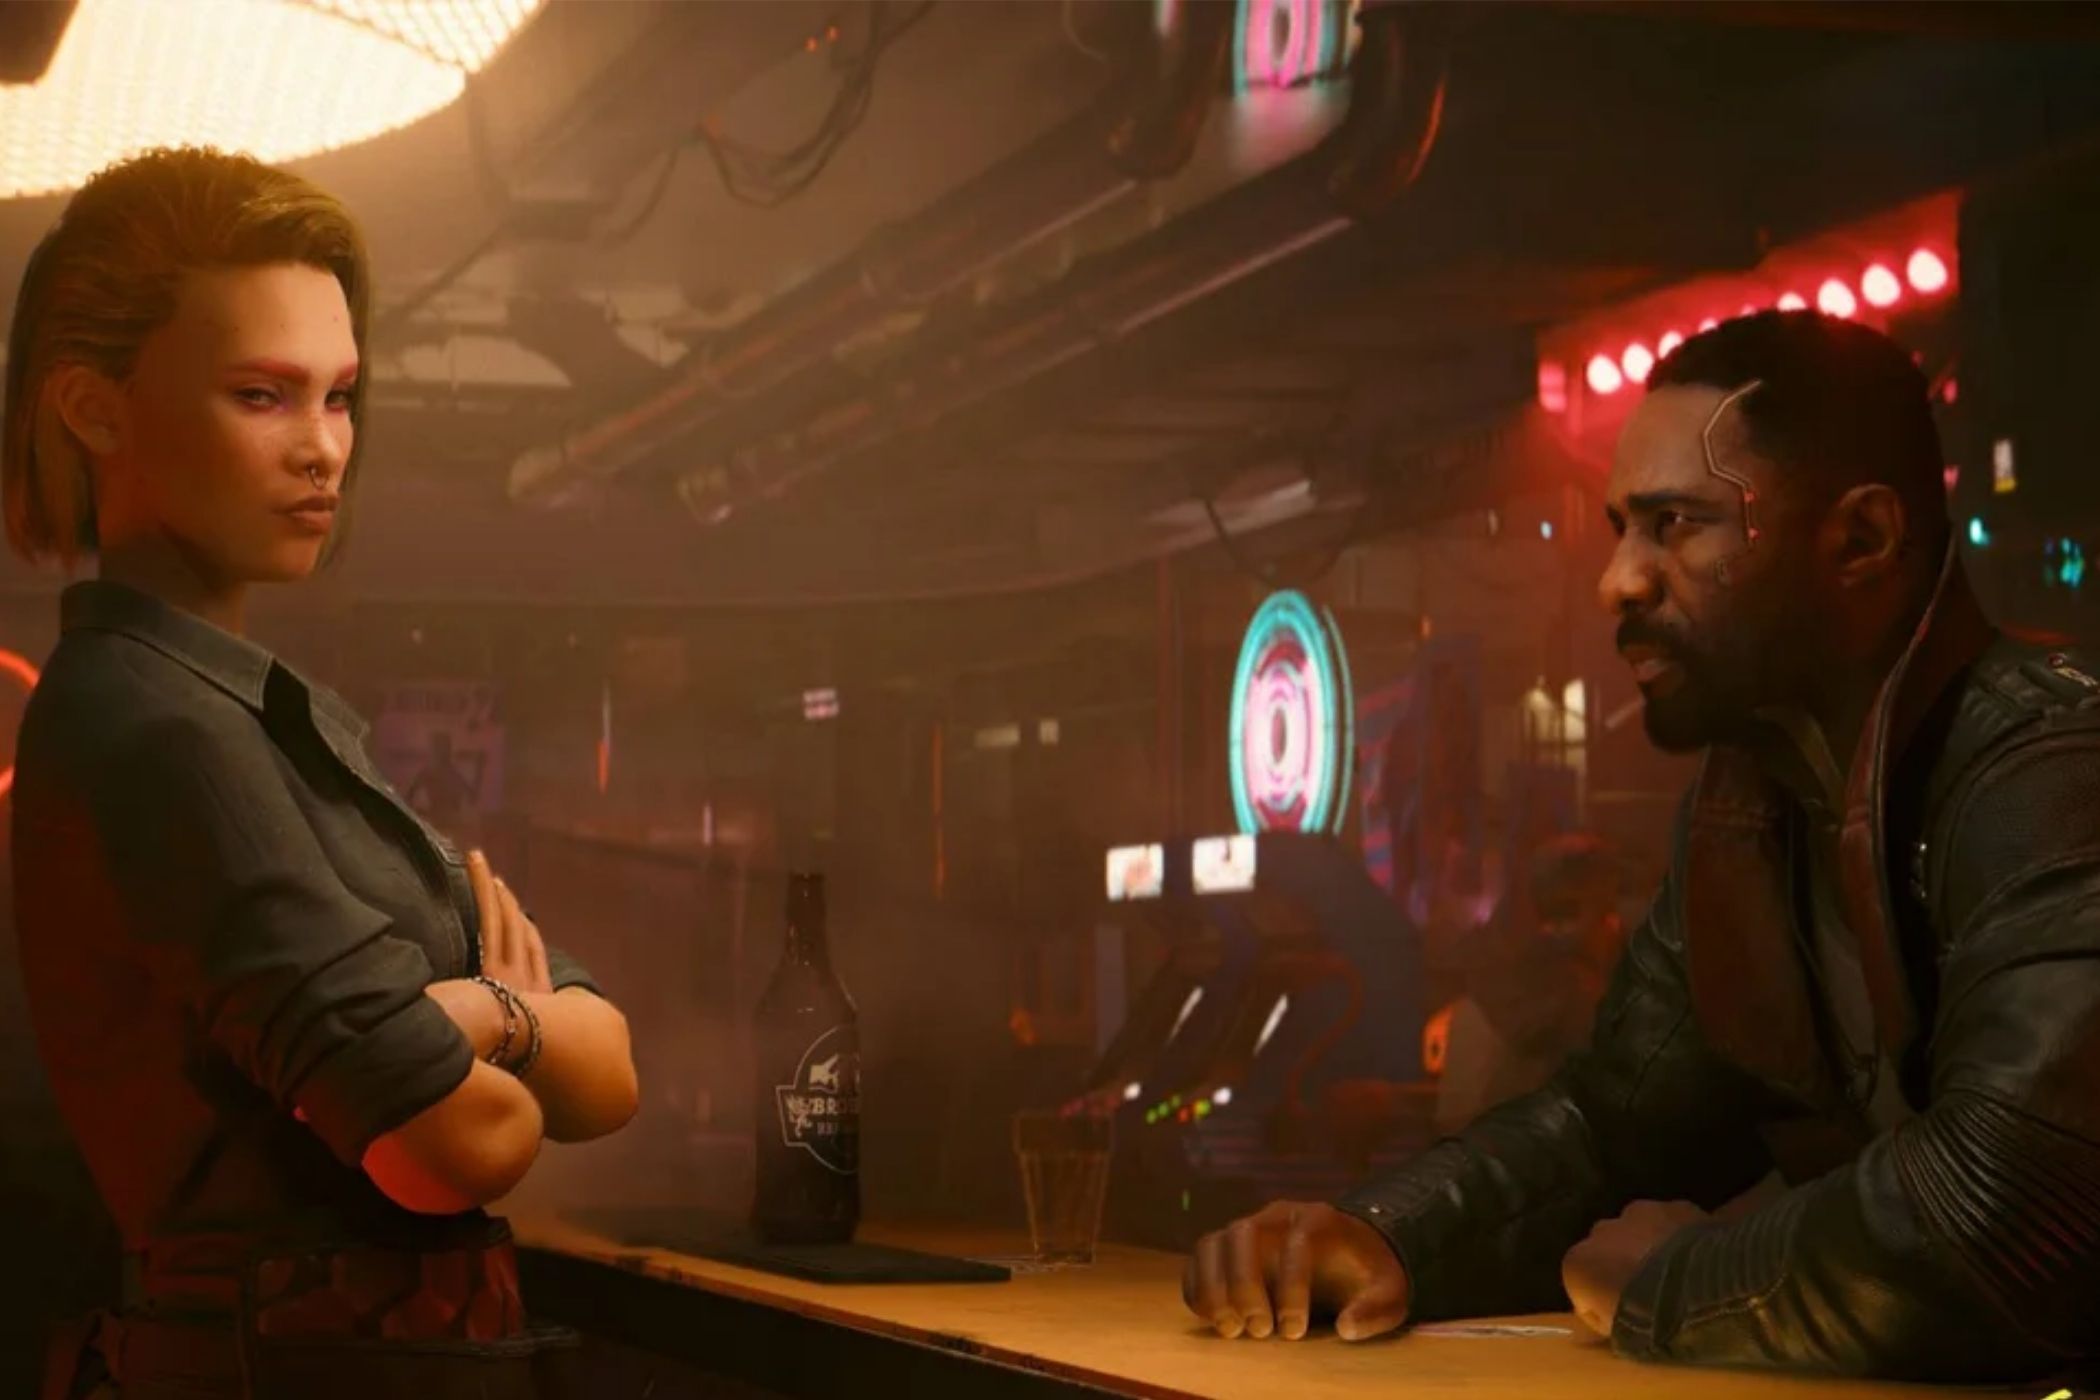 An image showing a screenshot of Cyberpunk 2077 phantom liberty gameplay with two people sitting at a bar.